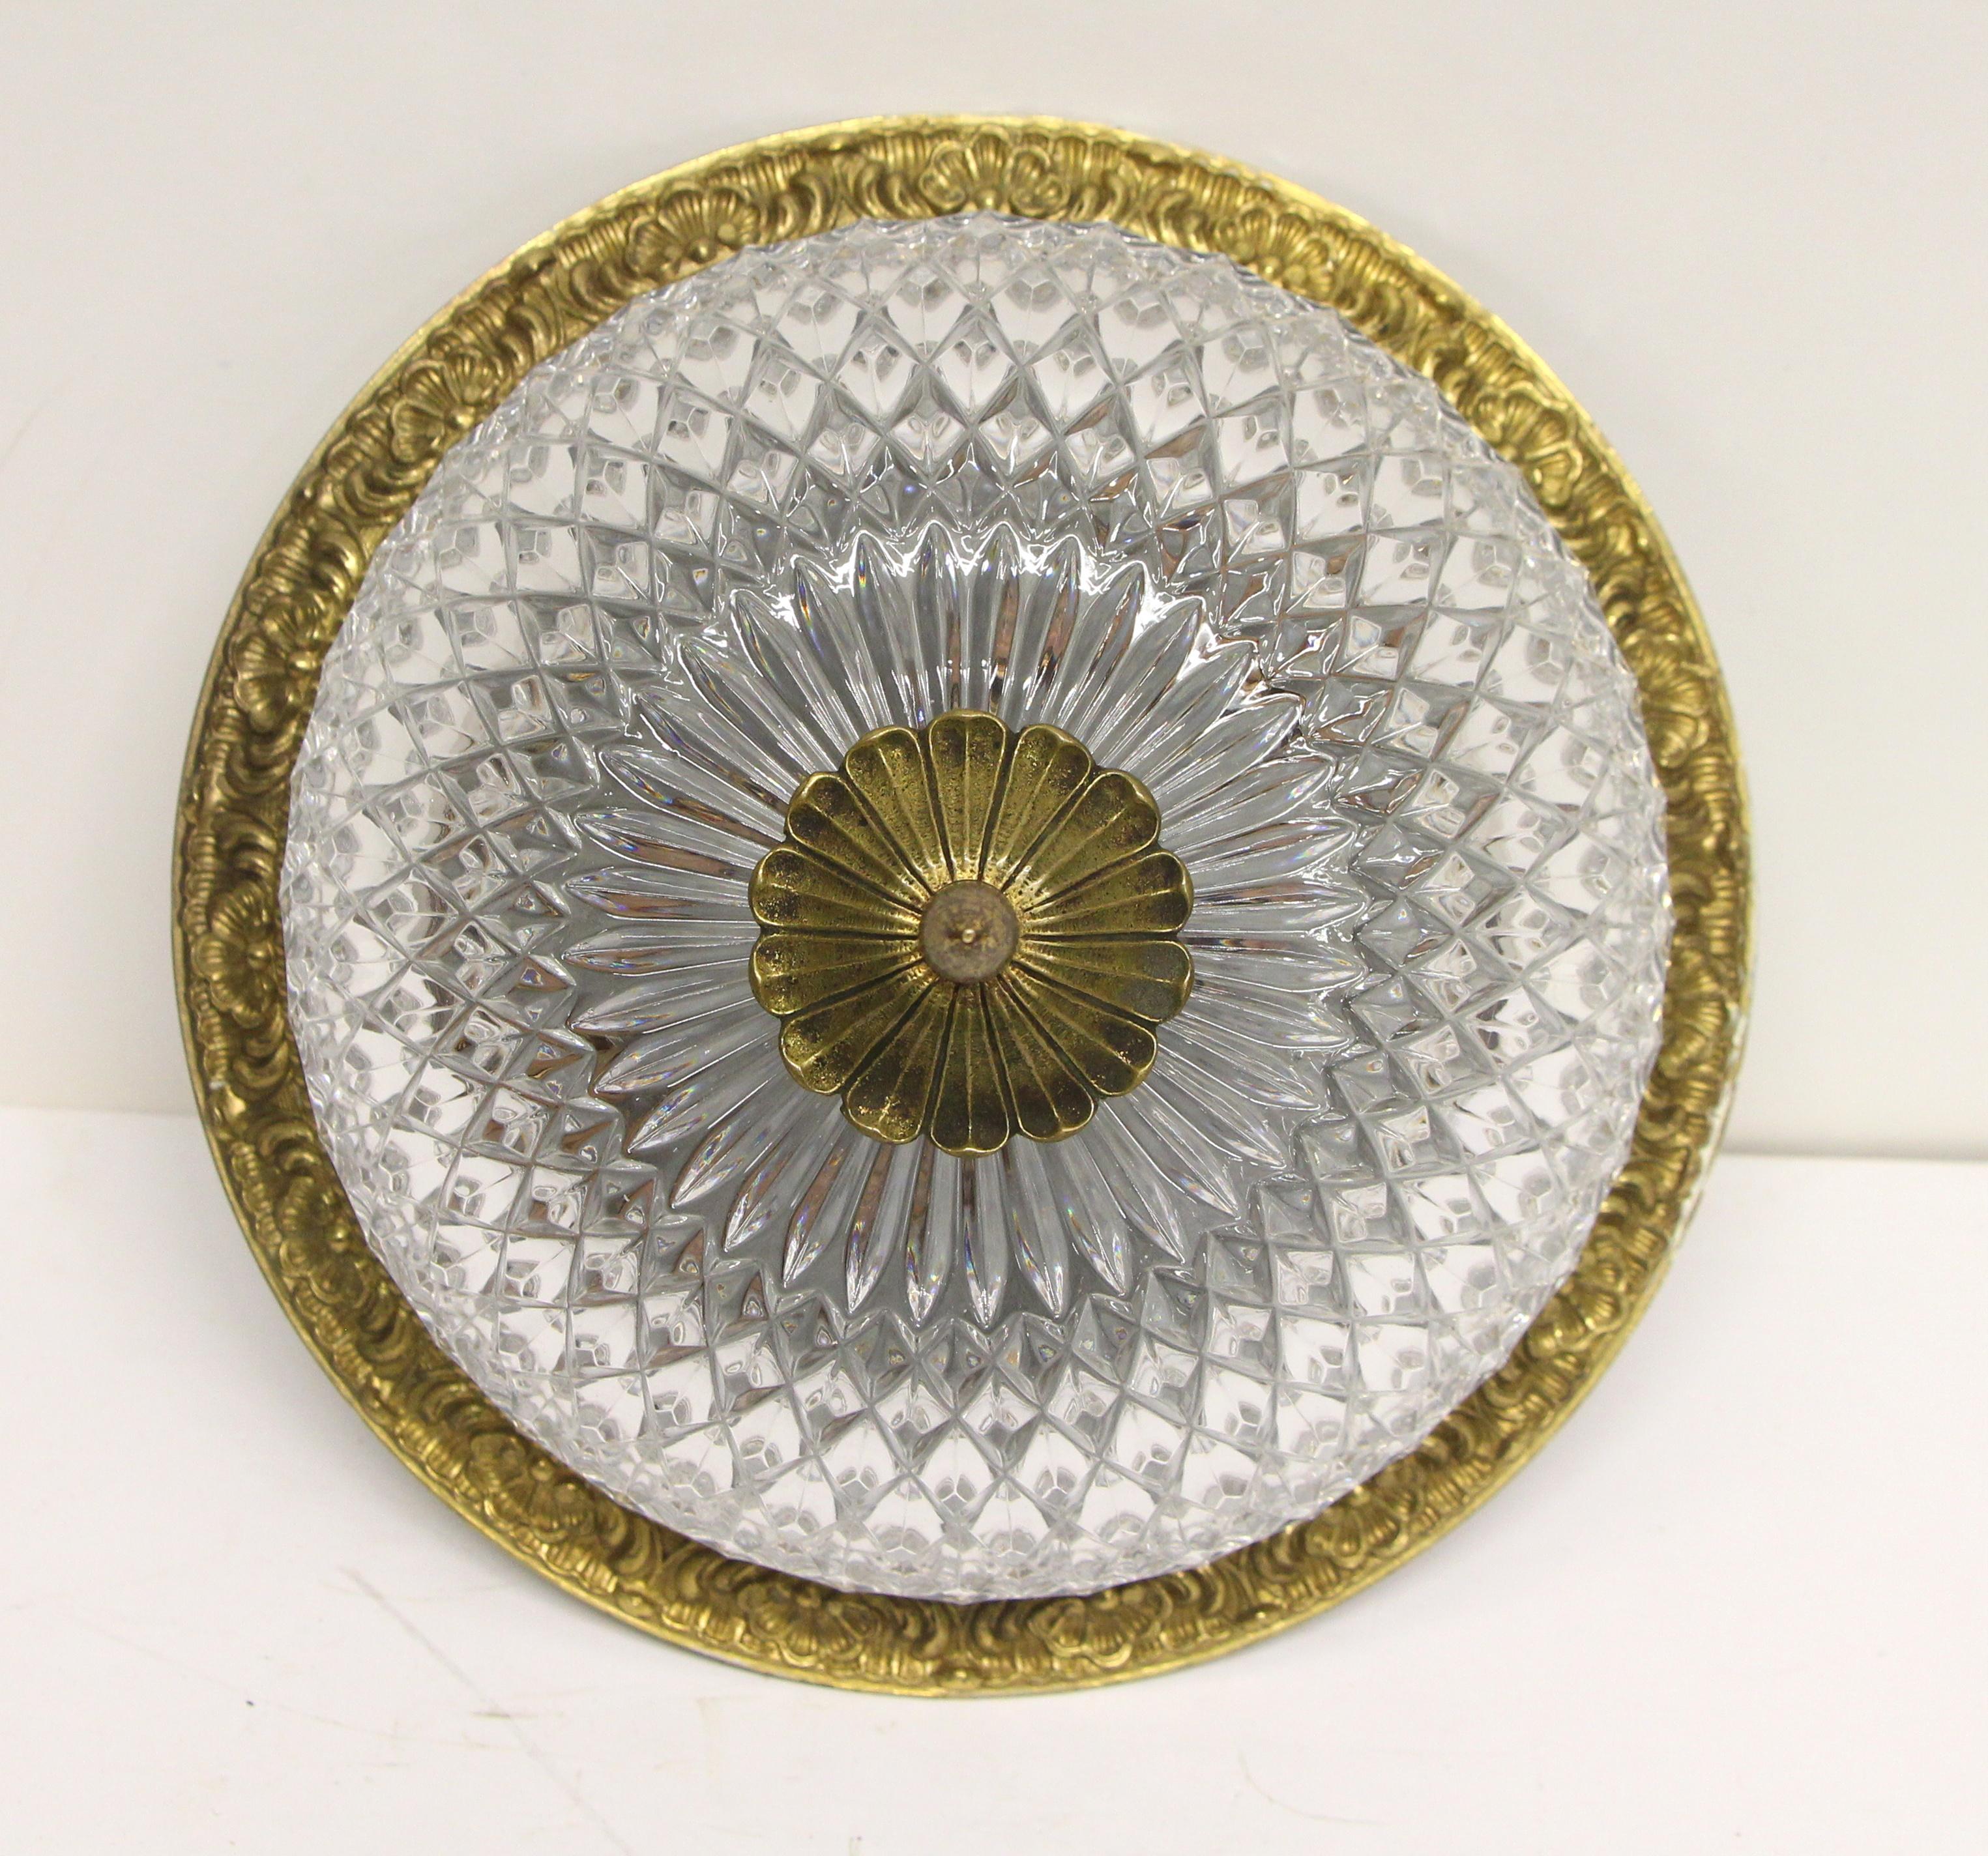 Clear cut crystal flush mount light with an ornate cast brass rim and finial. From the 1931 Waldorf Astoria Hotel Towers. A Waldorf Astoria authenticity card included with your purchase. This can be viewed at our Scranton, Pennsylvania location.